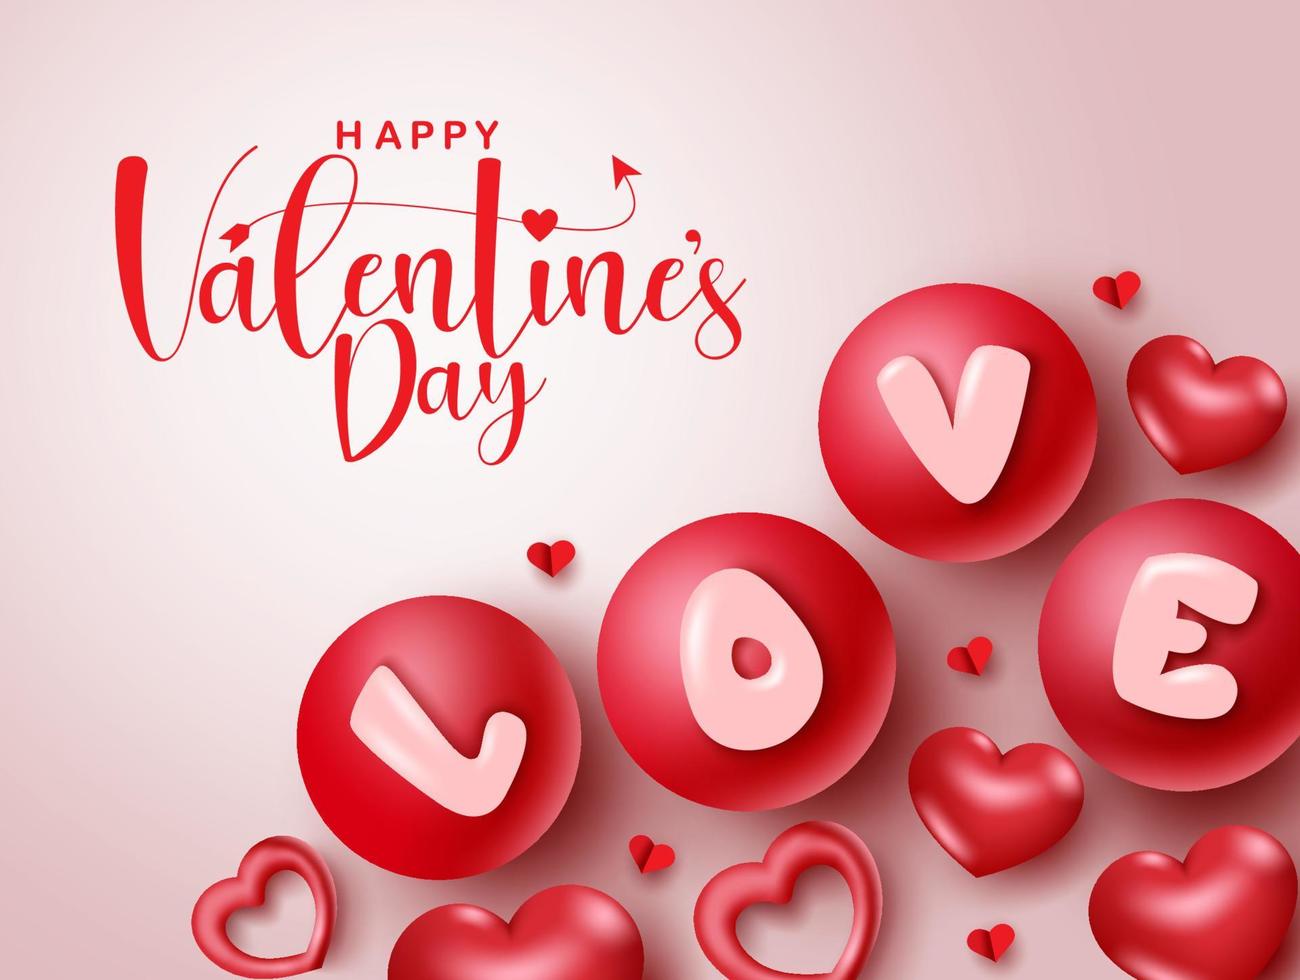 Valentines day vector background design. Happy valentine's day typography text with love and heart elements for cute and romantic valentines day decoration design. Vector illustration